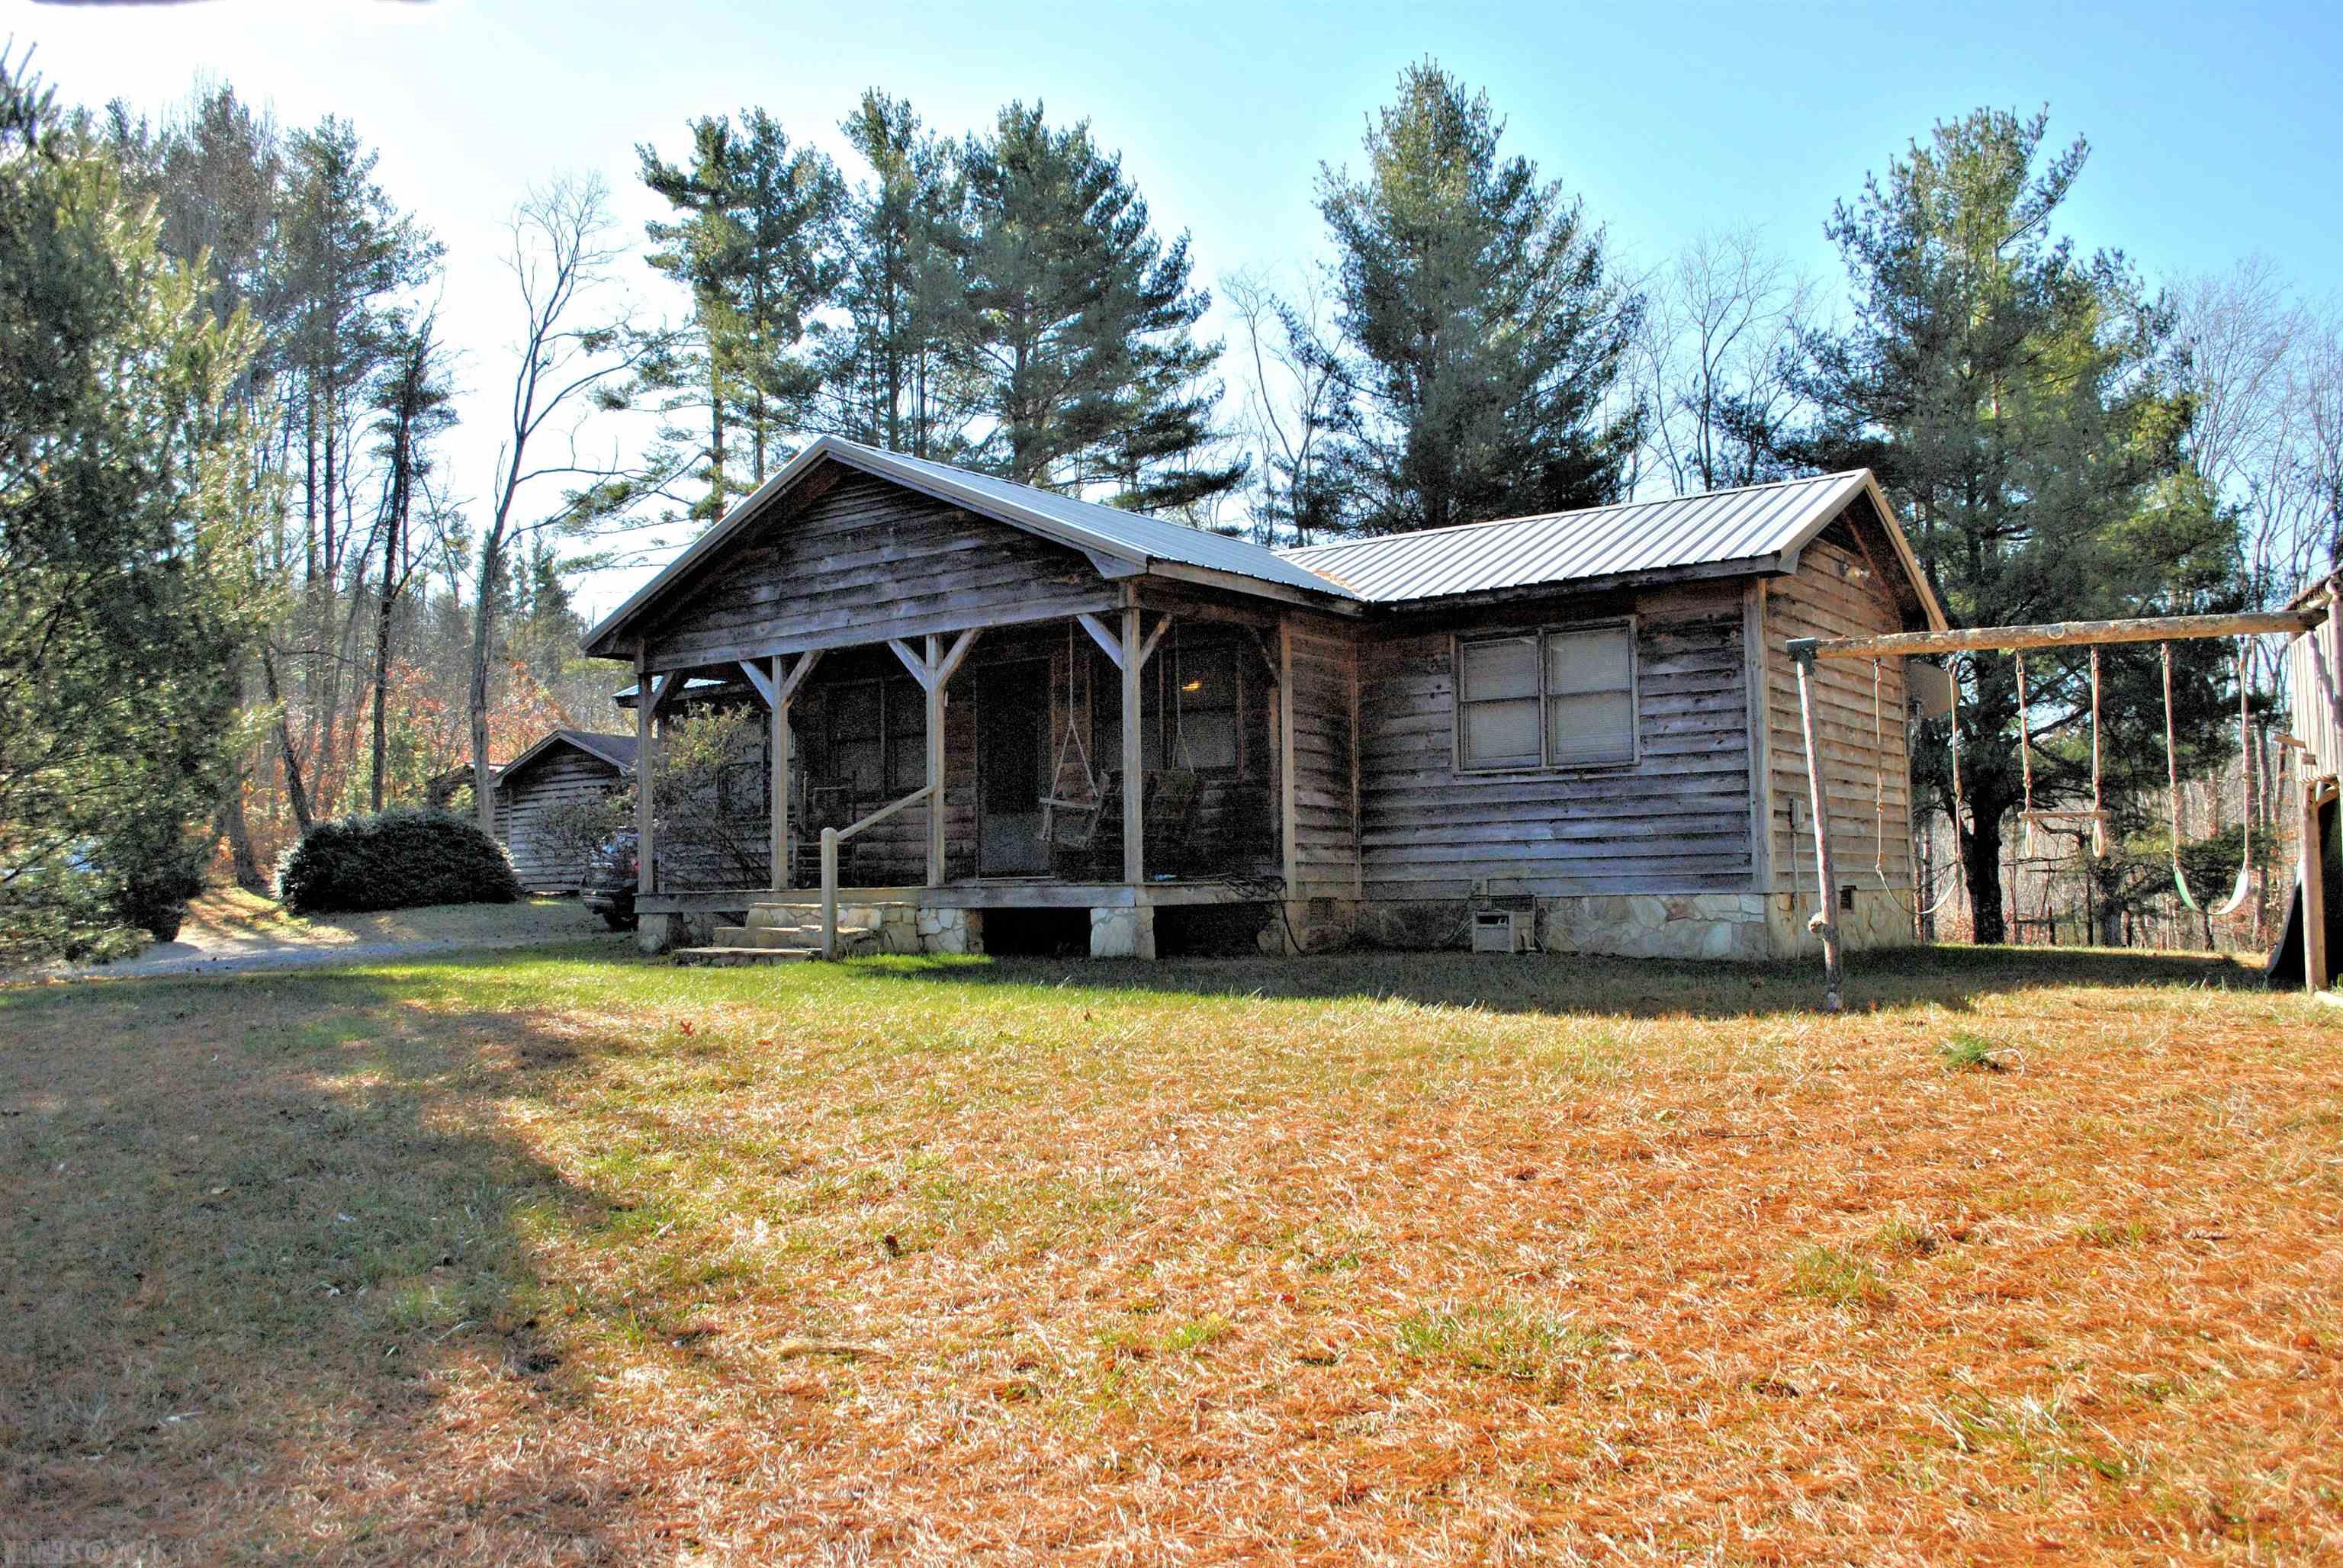 This two bedroom cabin in the woods sits on 21.796 acres in Floyd County and has a classic rocking chair front porch!  Step through the front door into a great room with exposed beams and a free standing gas heater with flue for woodstove too with a stone hearth. The rear patio door opens to the back deck overlooking the cleared fenced area around the house with a chicken coop, woodshed and garden shed. The full bathroom is spacious with a laundry area with cabinets, new shower in 2021 and room for cleaning supplies. The home boasts a brand new metal roof in 2021 and new range.  The land is divided into two tax parcels with a new survey and three Bedroom Perk Test too.  Call for your private showing or for more information!